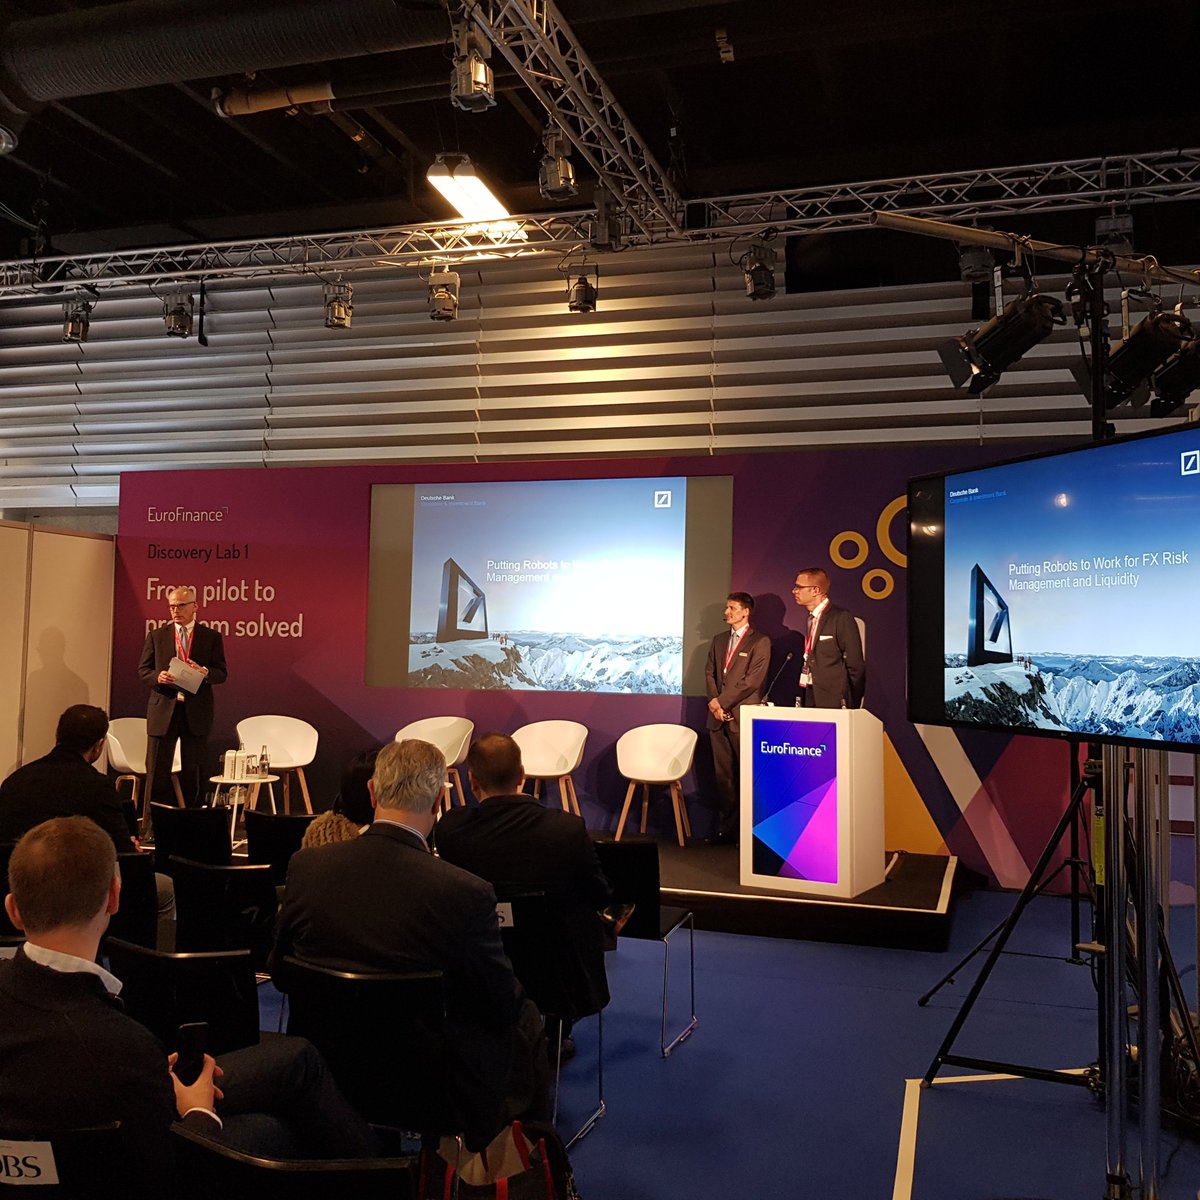 I really appreciated the opportunity to speak at the #EuroFinance conference. I am sharing a few impressions from our session on how to use RPA to address our fx exposure at #YusenLogistics. Many thanks to the team of #DeutscheBank as well as Dan Blumen.